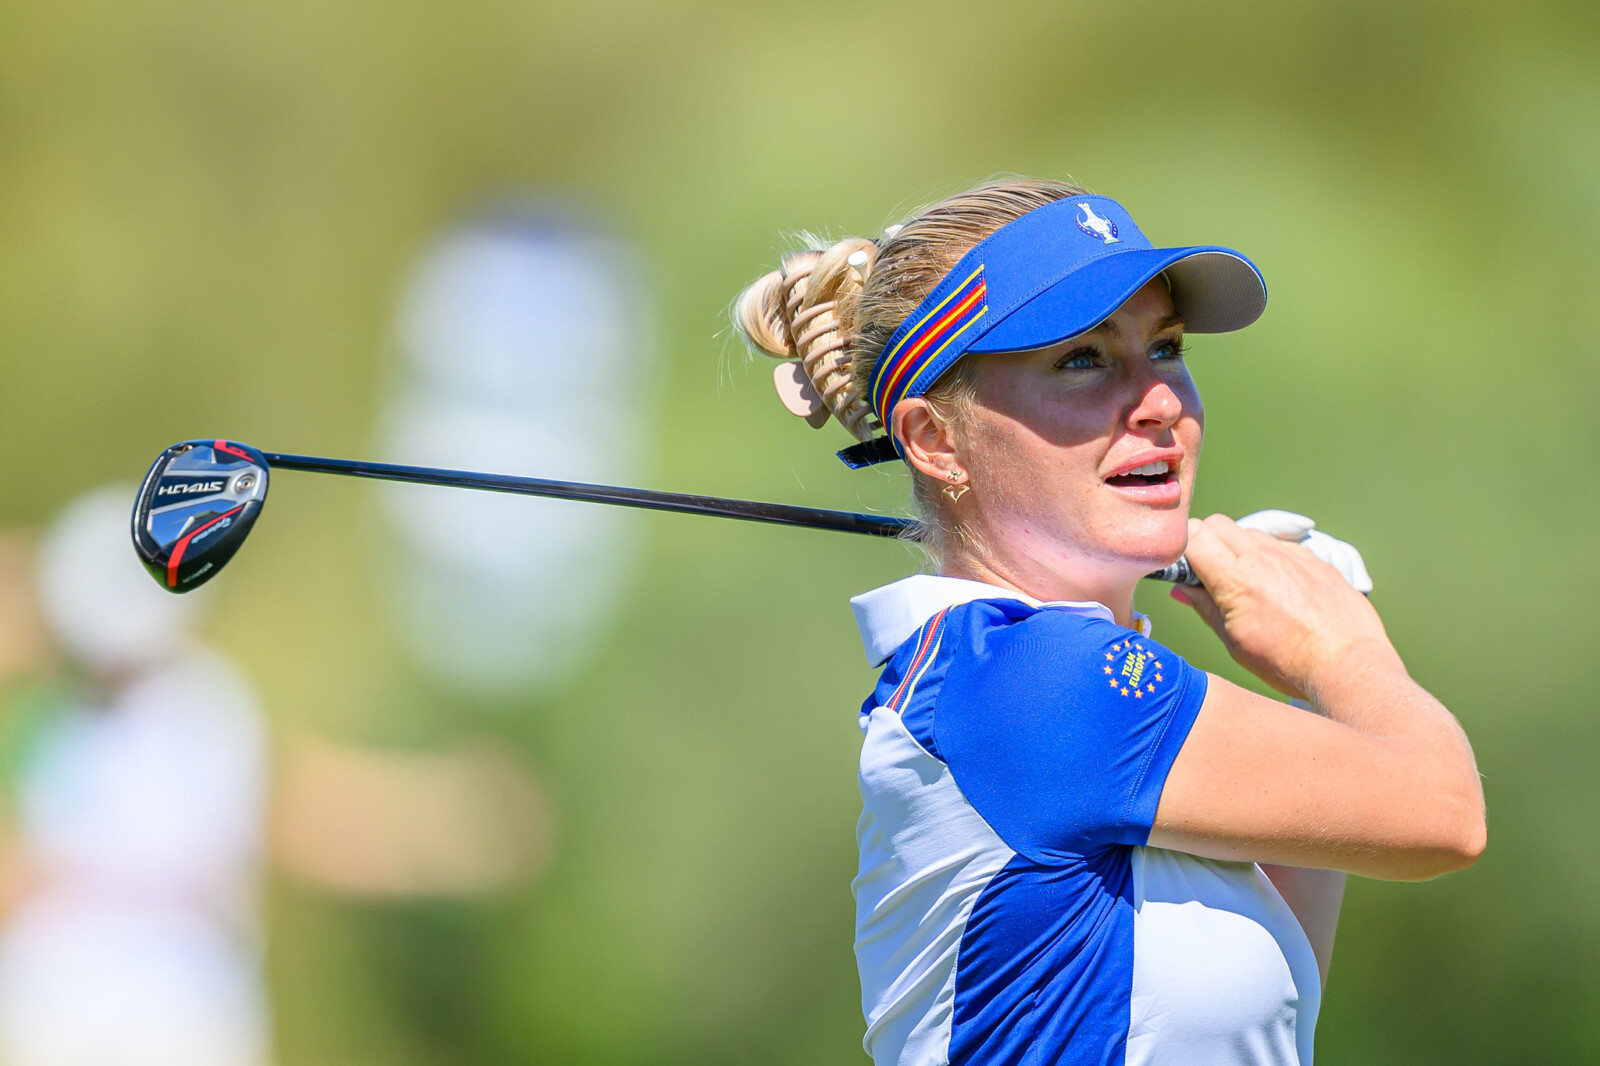 SOLHEIM CUP: Europe enjoys Super Saturday to level the scores